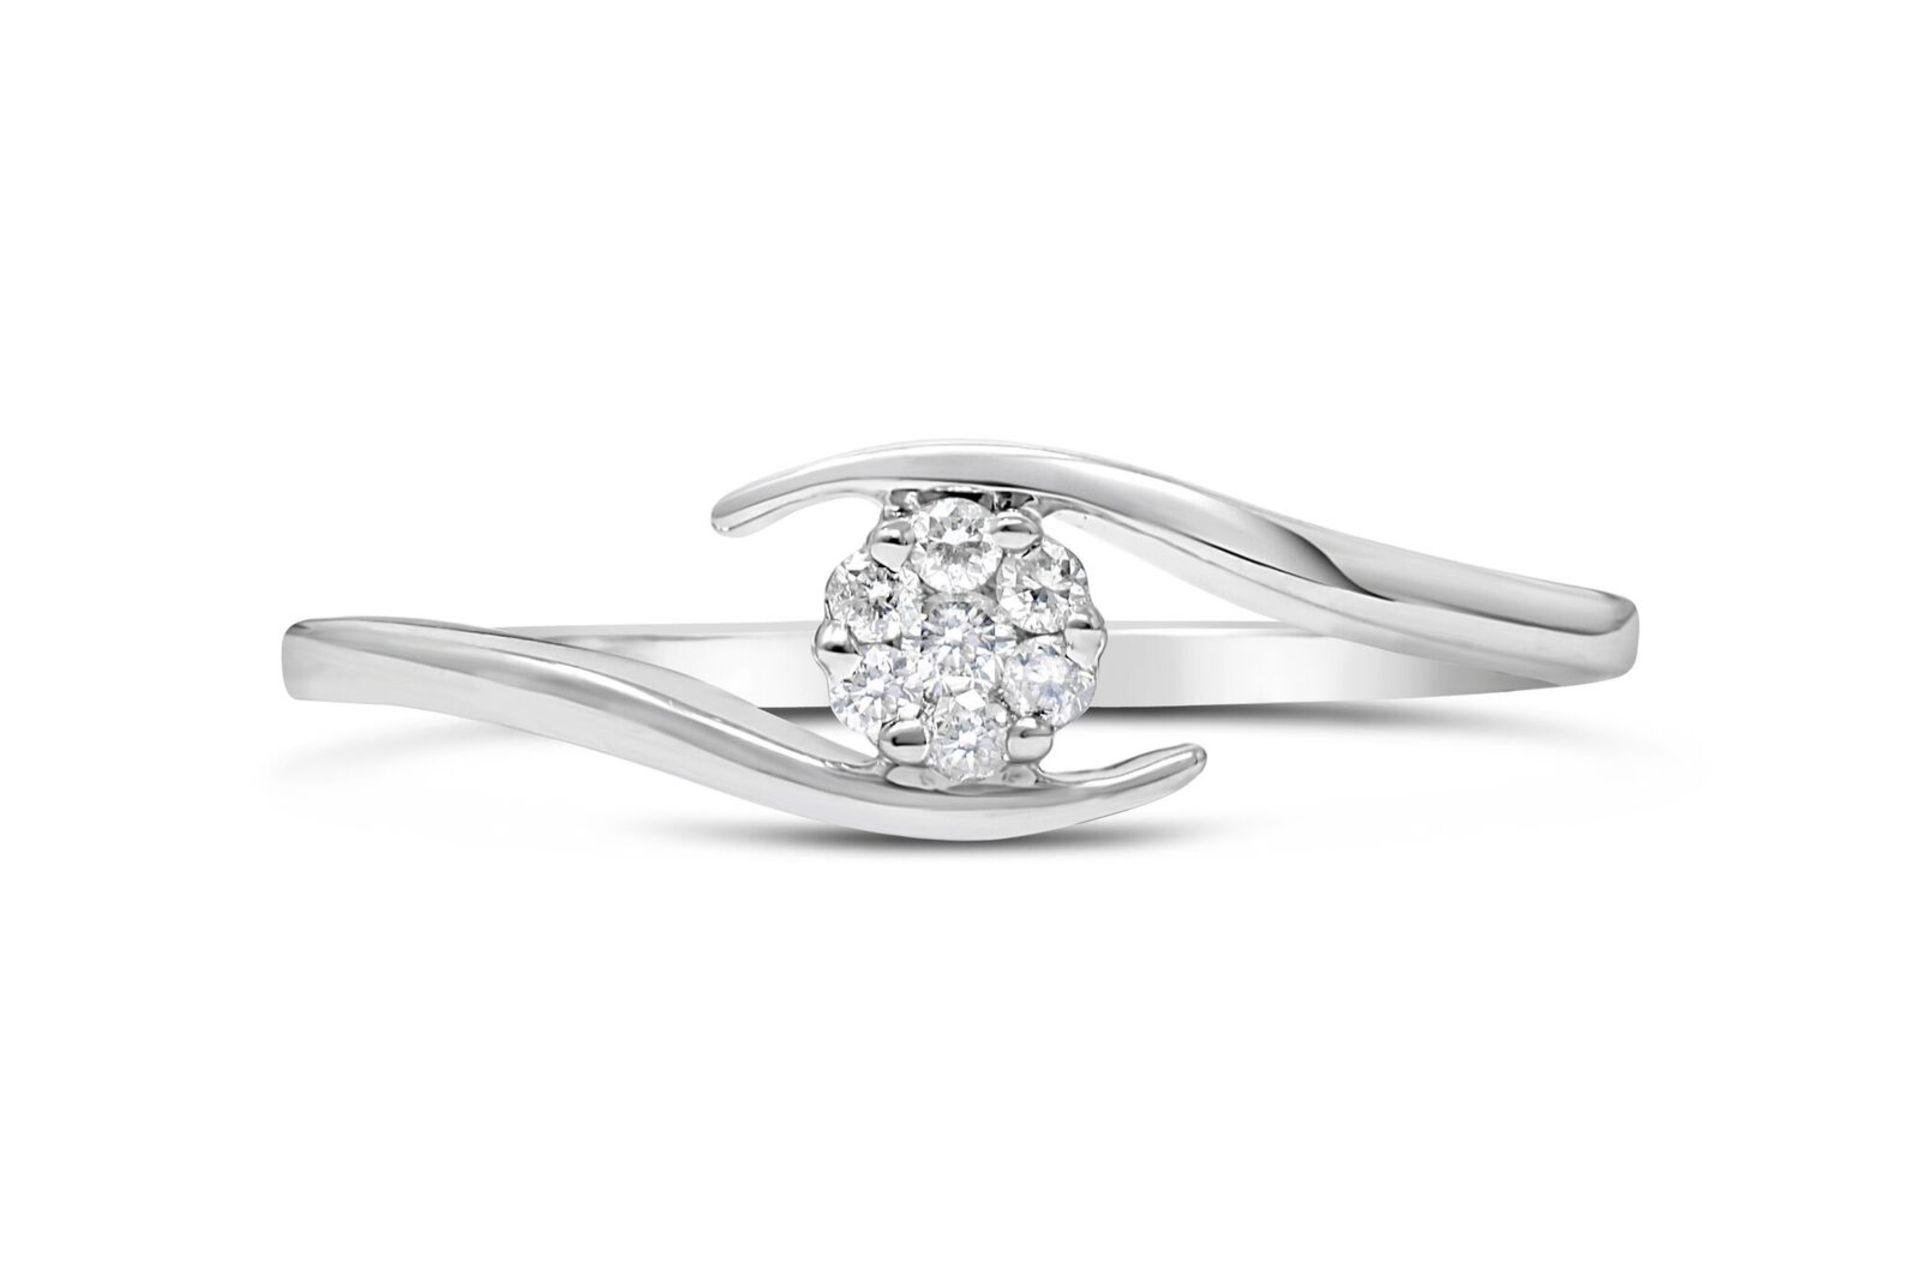 Crossover Diamond Ring With 0.08ct Cluster Centre, 9ct White Gold RRP £369 Weight 1.23g, Diamond